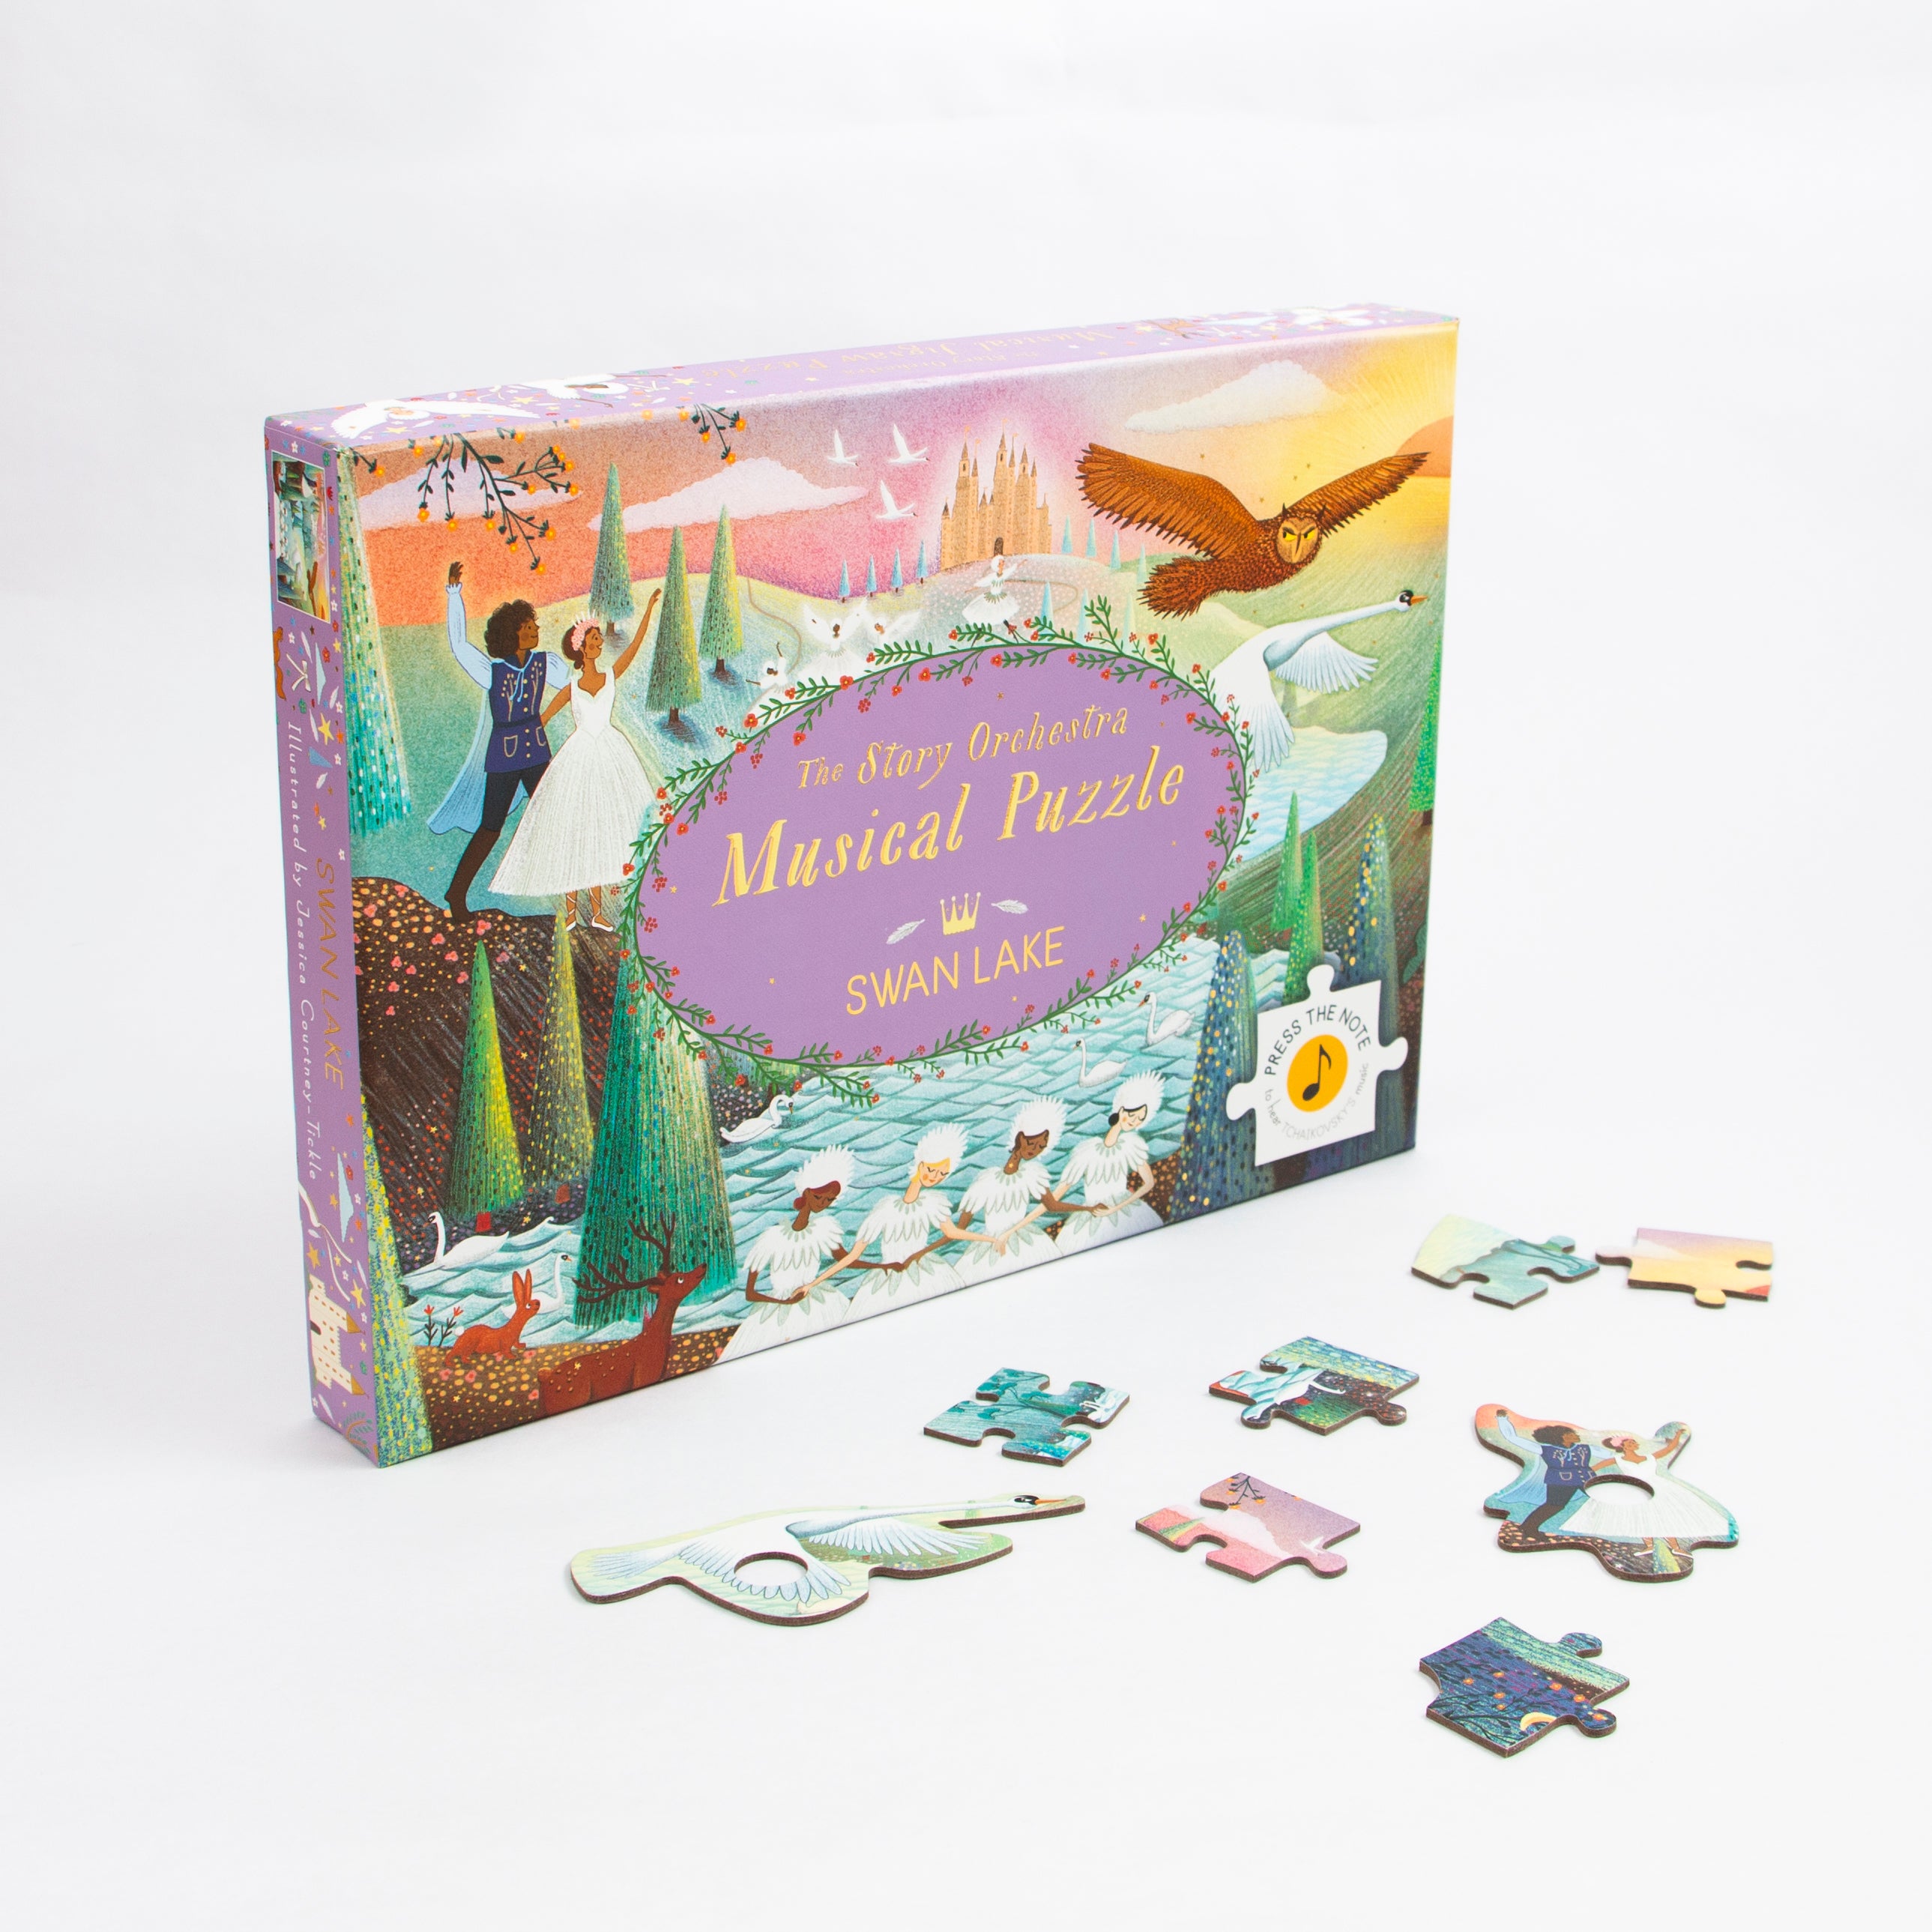 THE STORY ORCHESTRA: MUSICAL PUZZLE